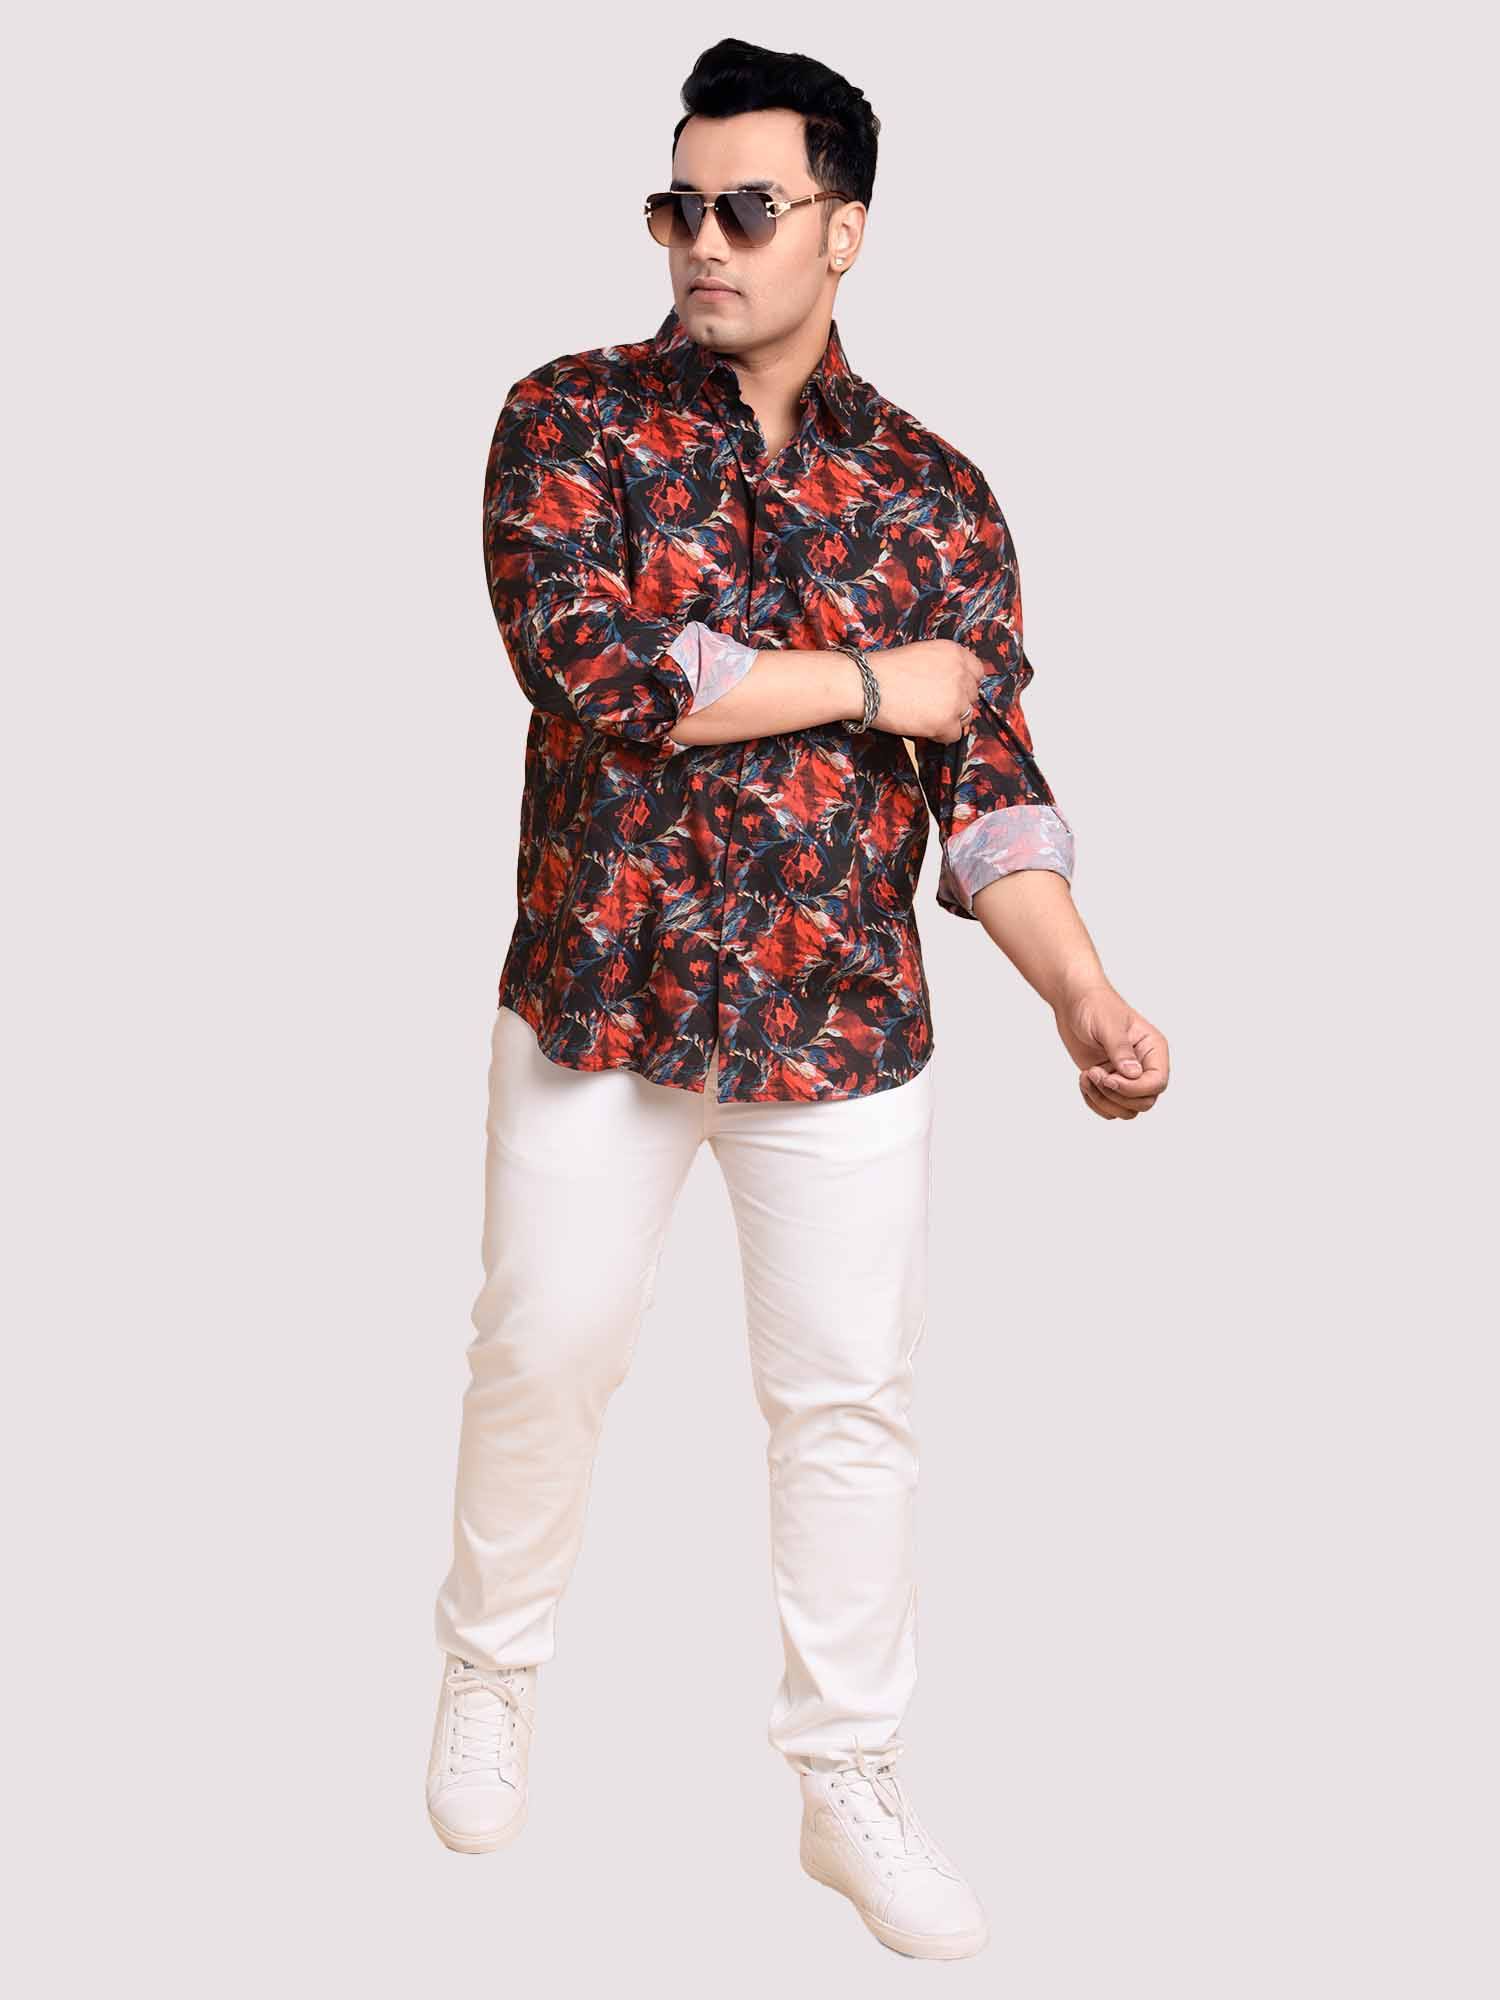 Red Current Printed Cotton Full sleeve Men's Plus size - Guniaa Fashions